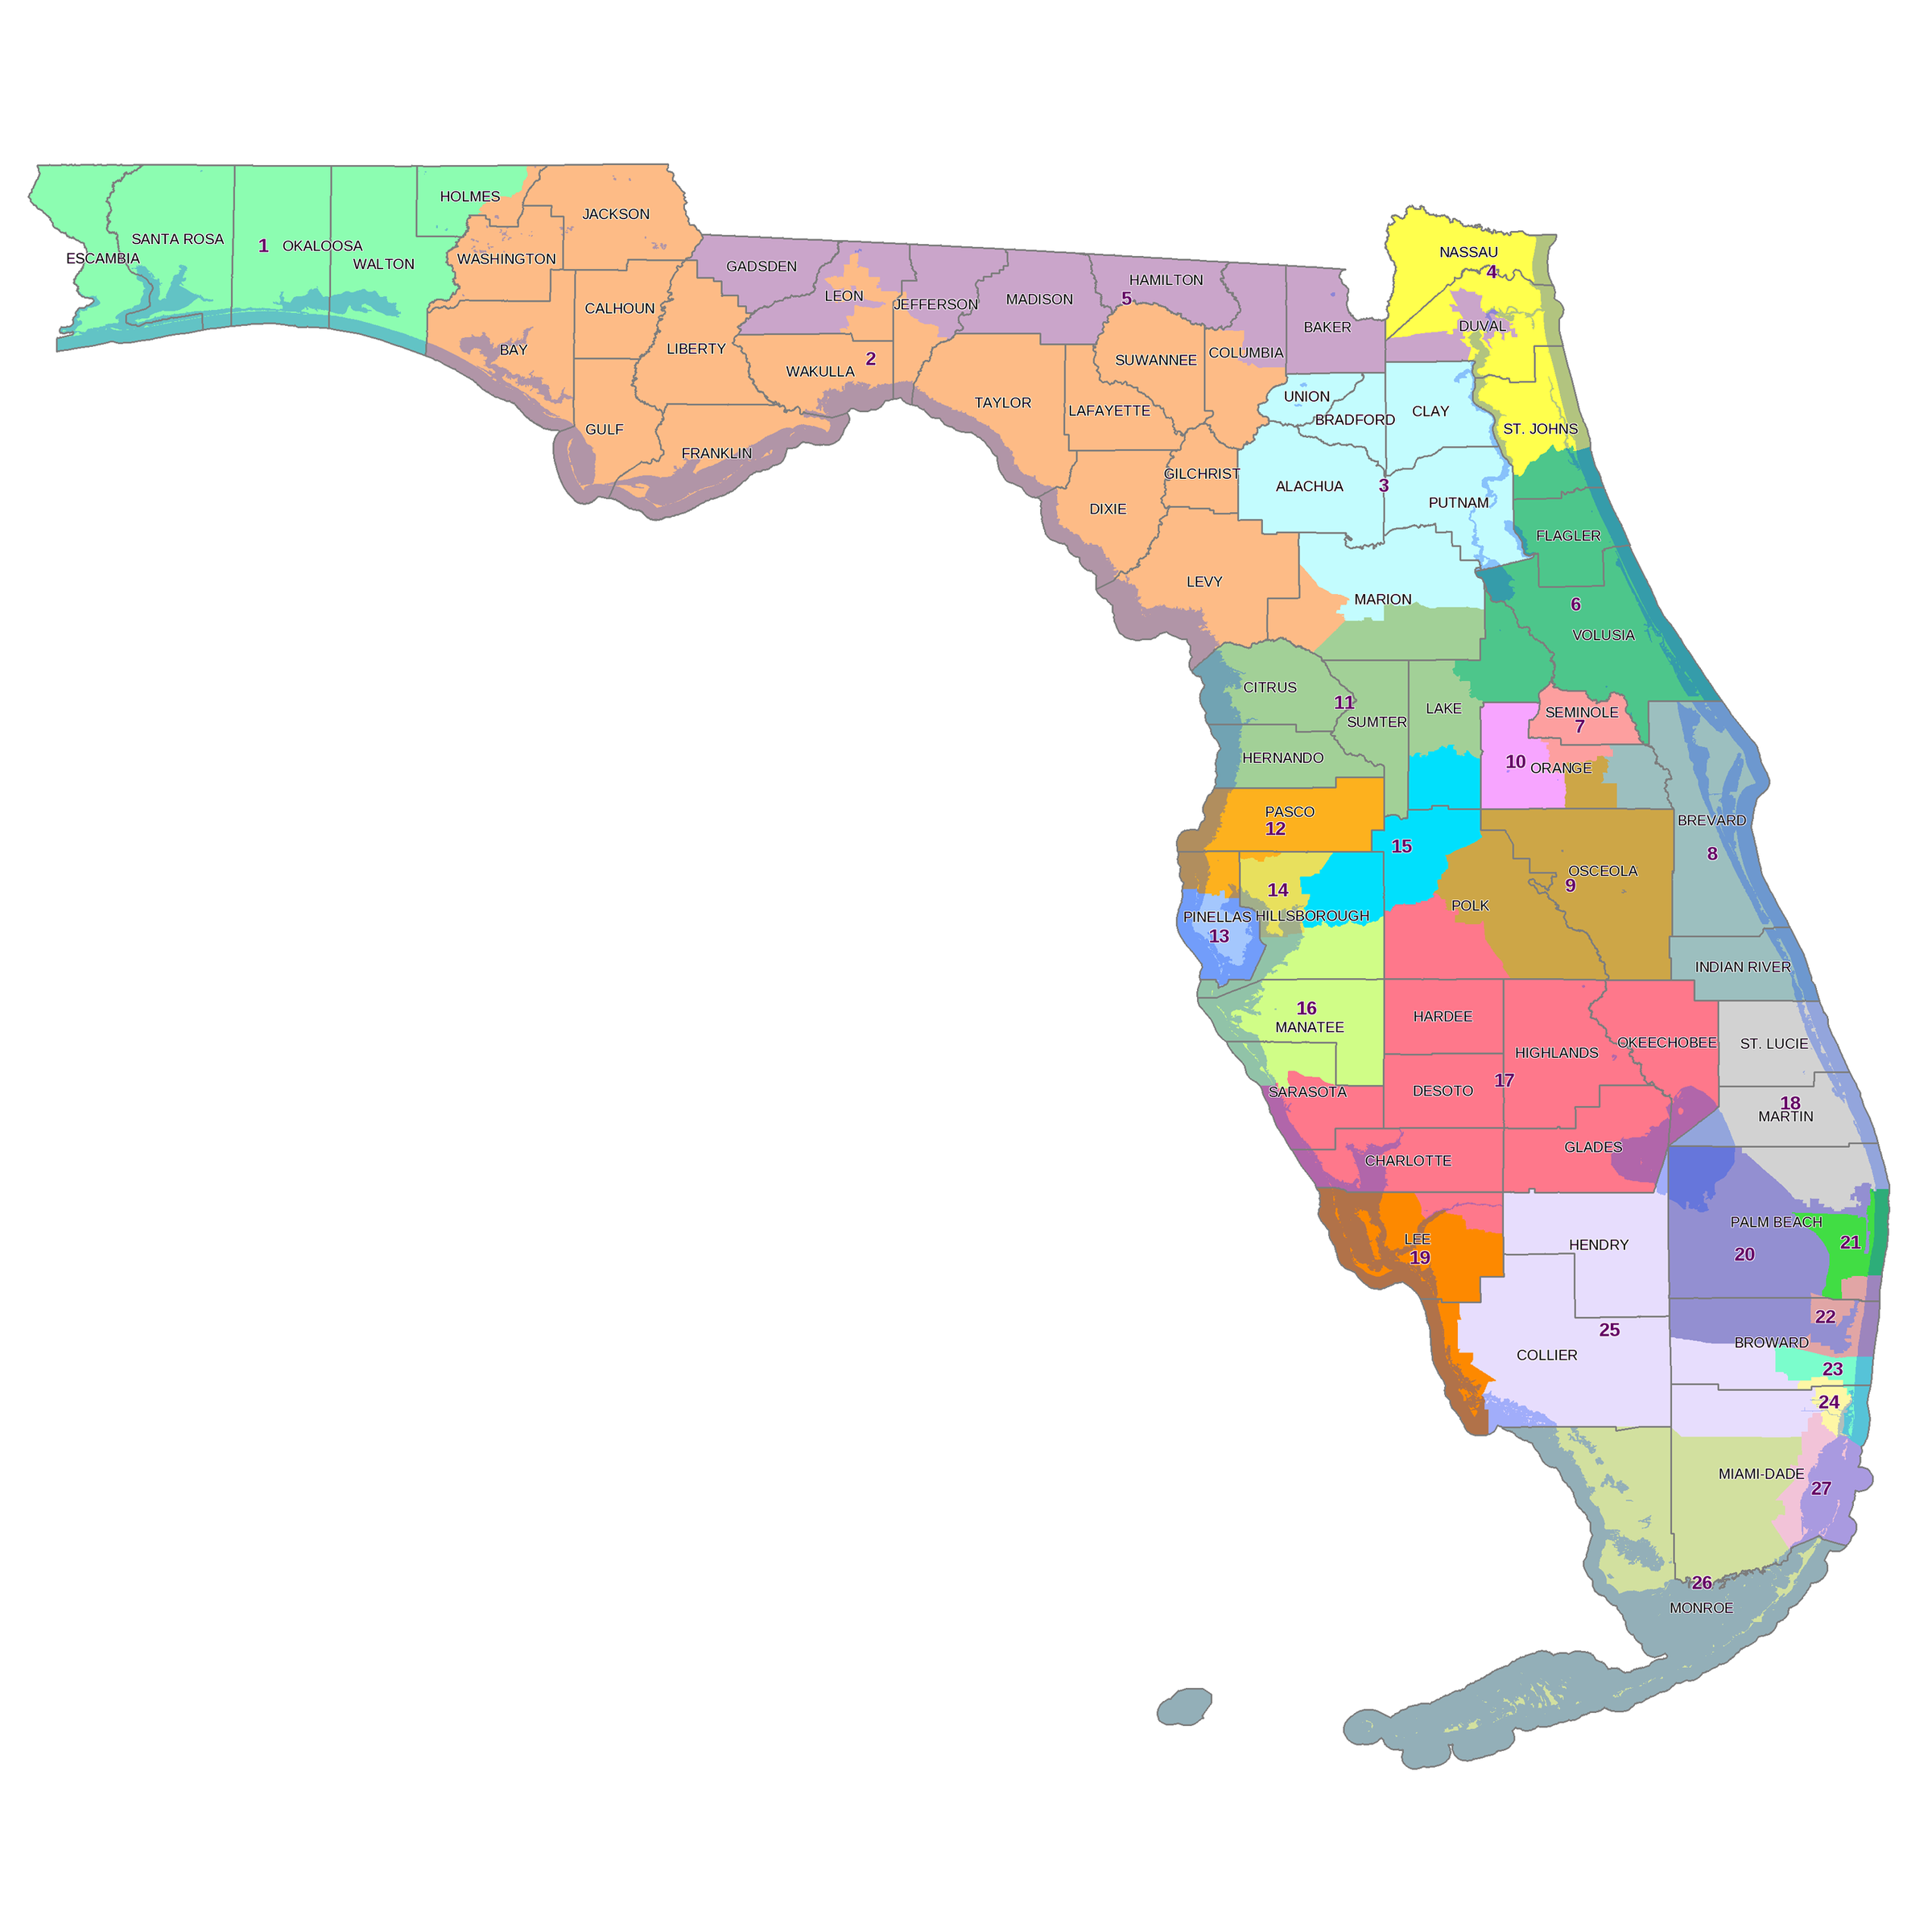 Florida House Approves Congressional Redistricting Plan WJCT NEWS